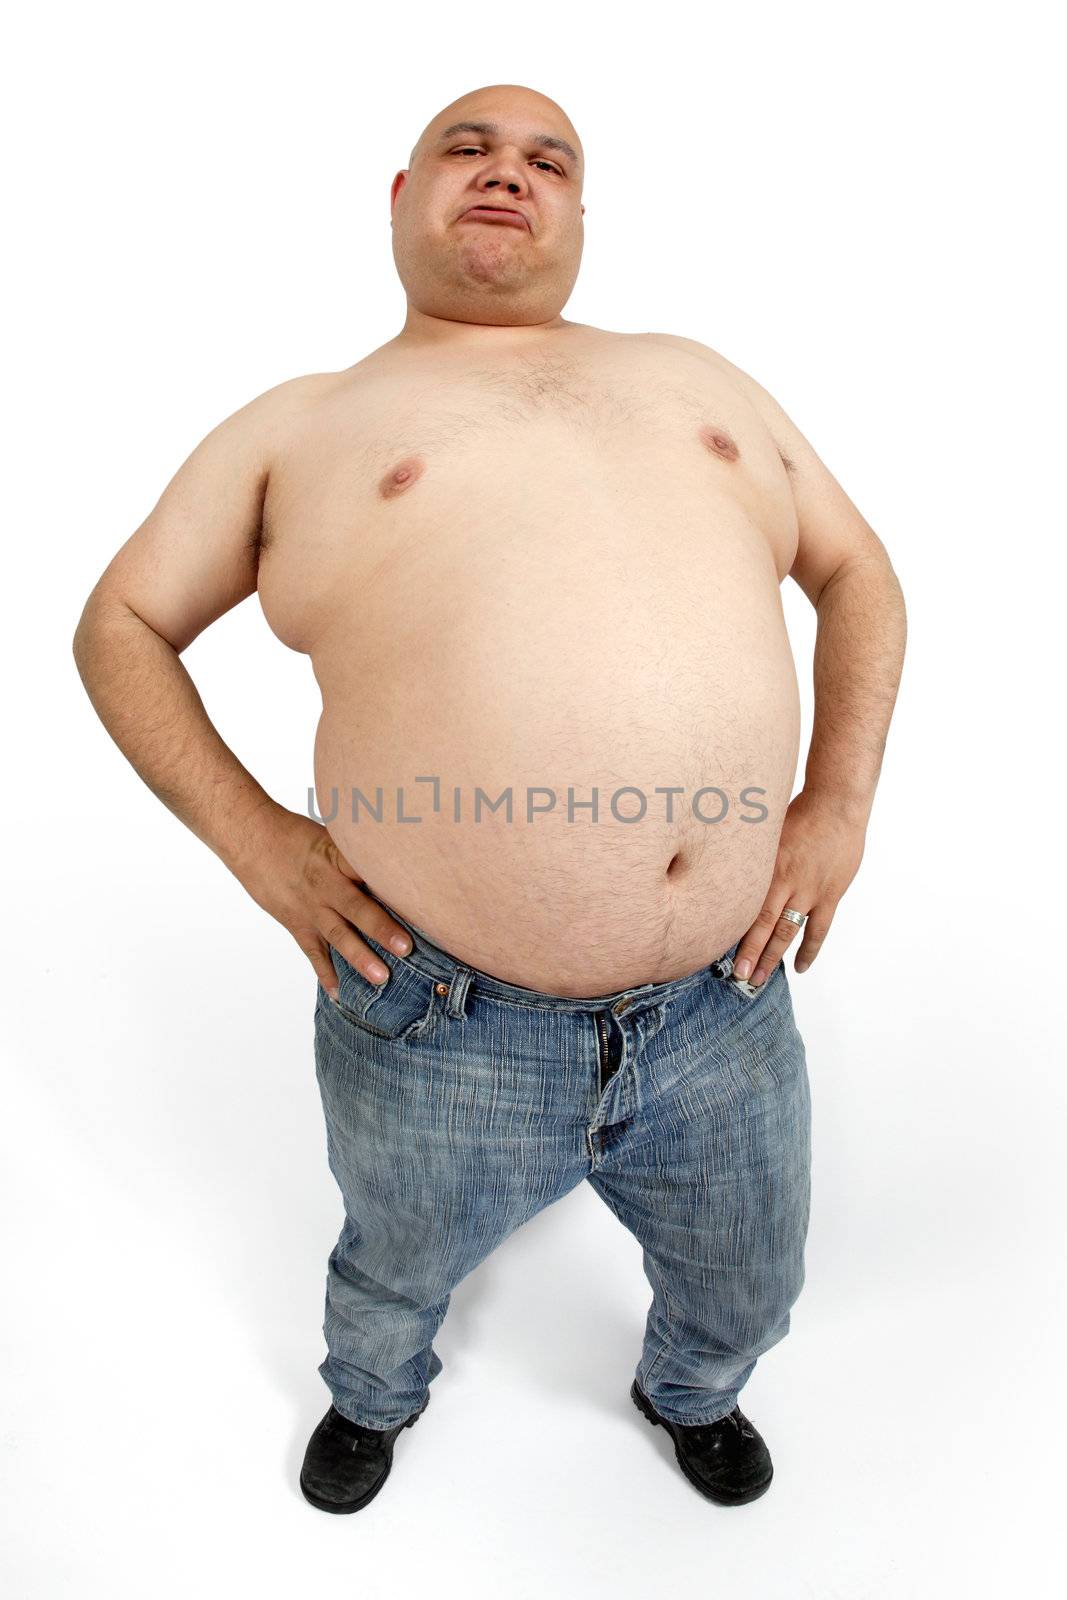 Overweight male - taken with fish-eye lens for exaggerated stomach.
